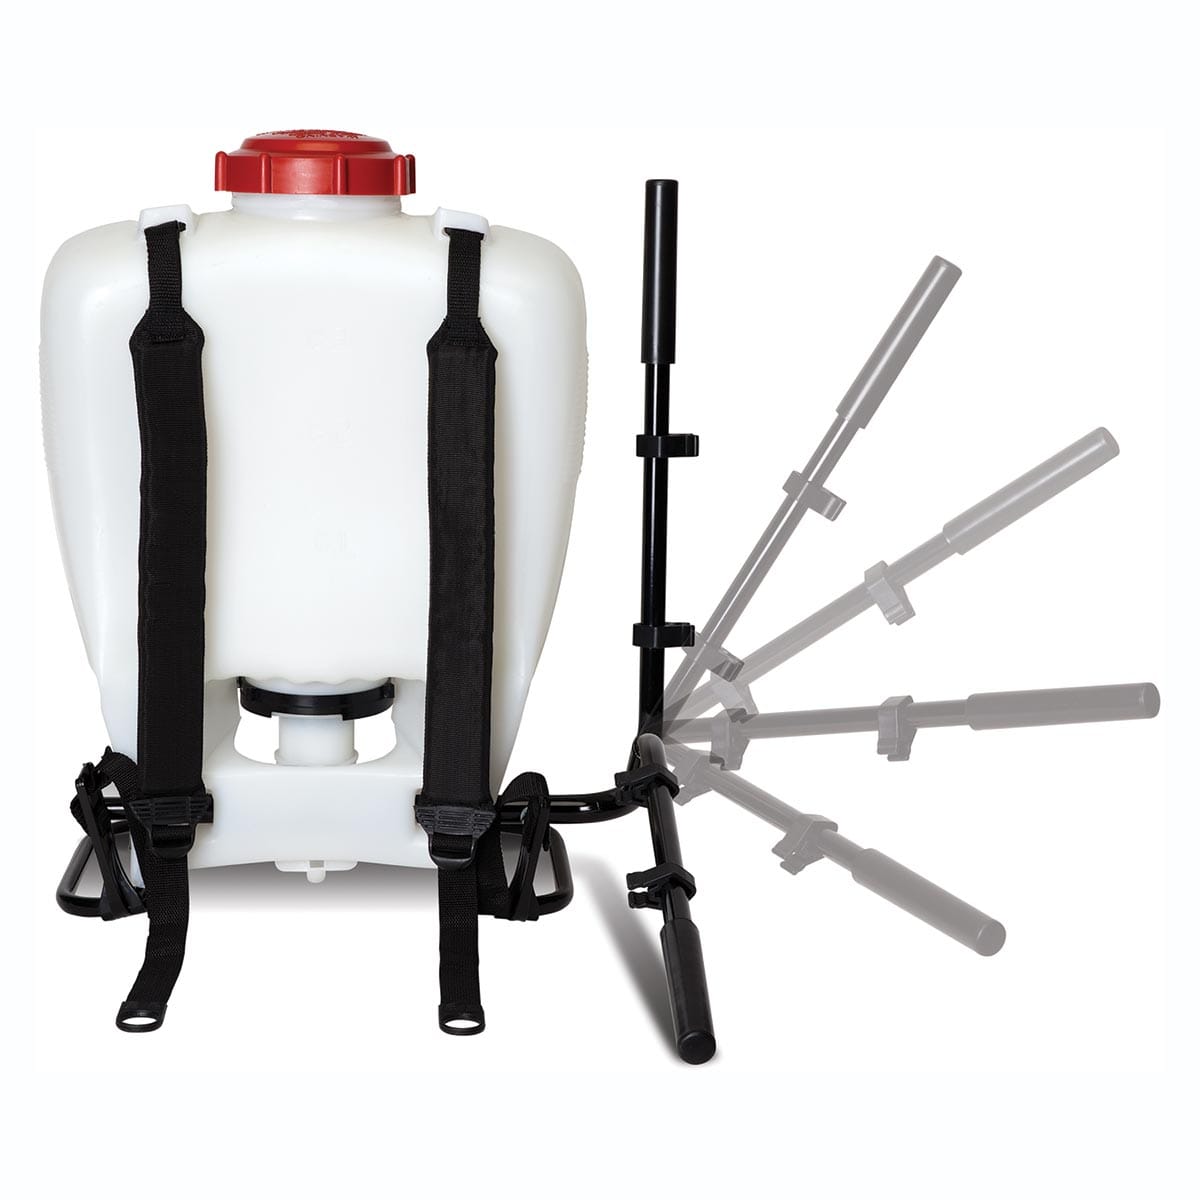 Solo 425-101 Backpack Sprayer, 4 Gallon, Piston, w/Carry Handle